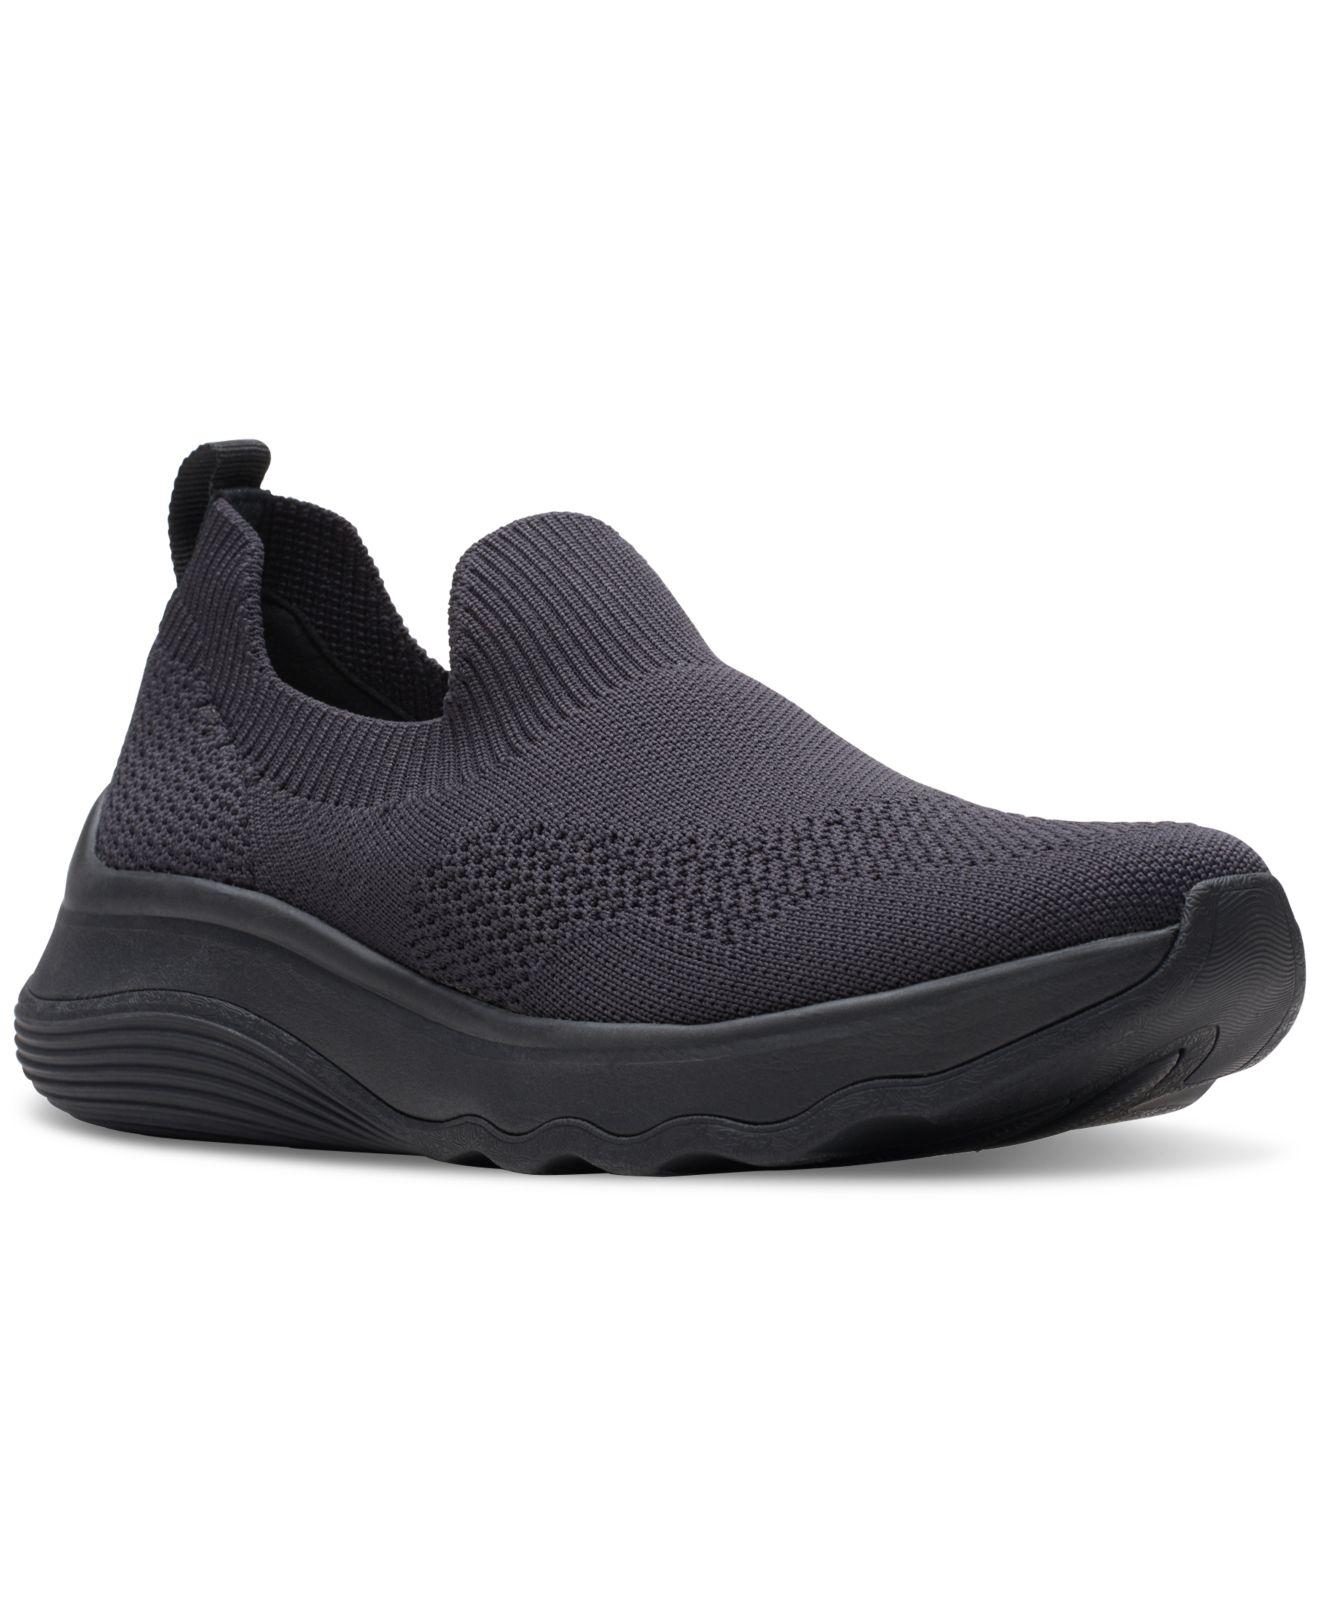 Clarks Circuit Path Knit Slip-on Wedge Shoes in Blue | Lyst